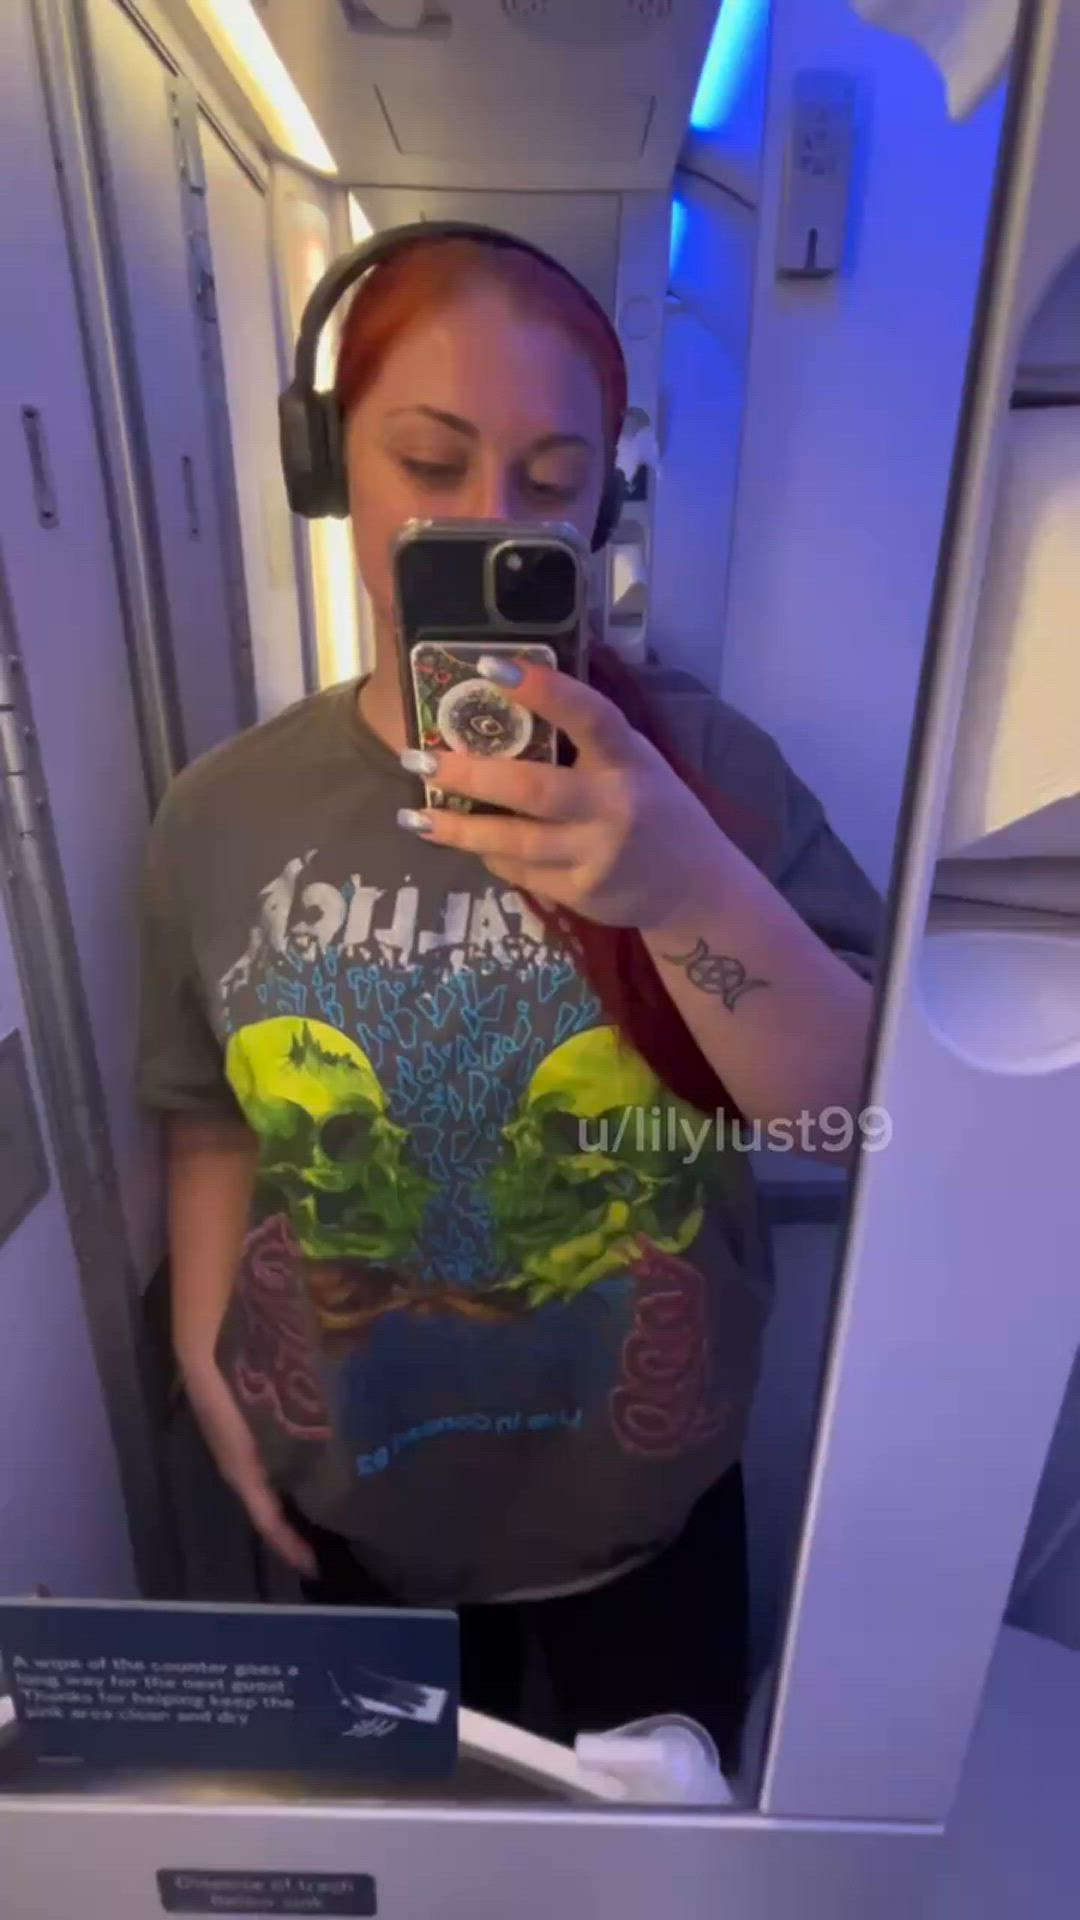 Airplane porn video with onlyfans model lilylust99 <strong>@lilylust99</strong>